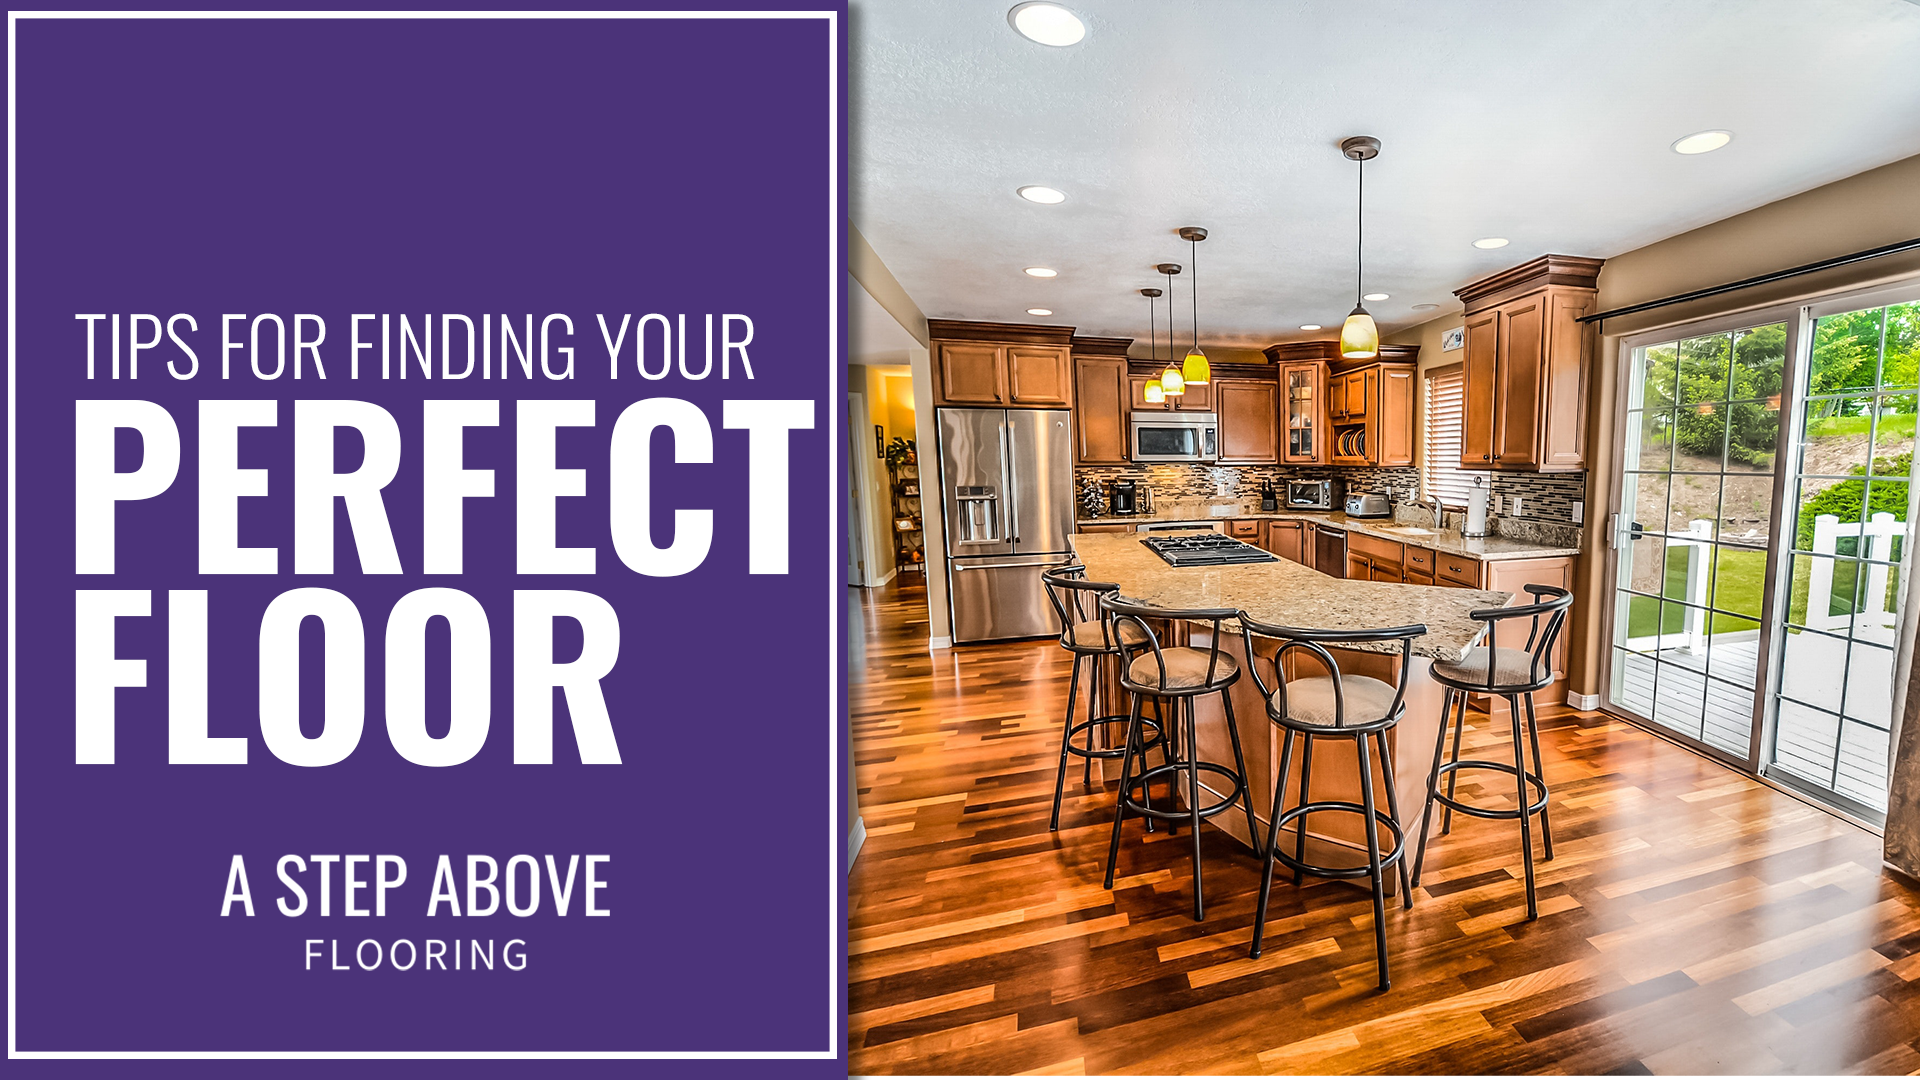 A kitchen with a hardwood floor. The text reads, "Tips for Finding Your Perfect Floor"